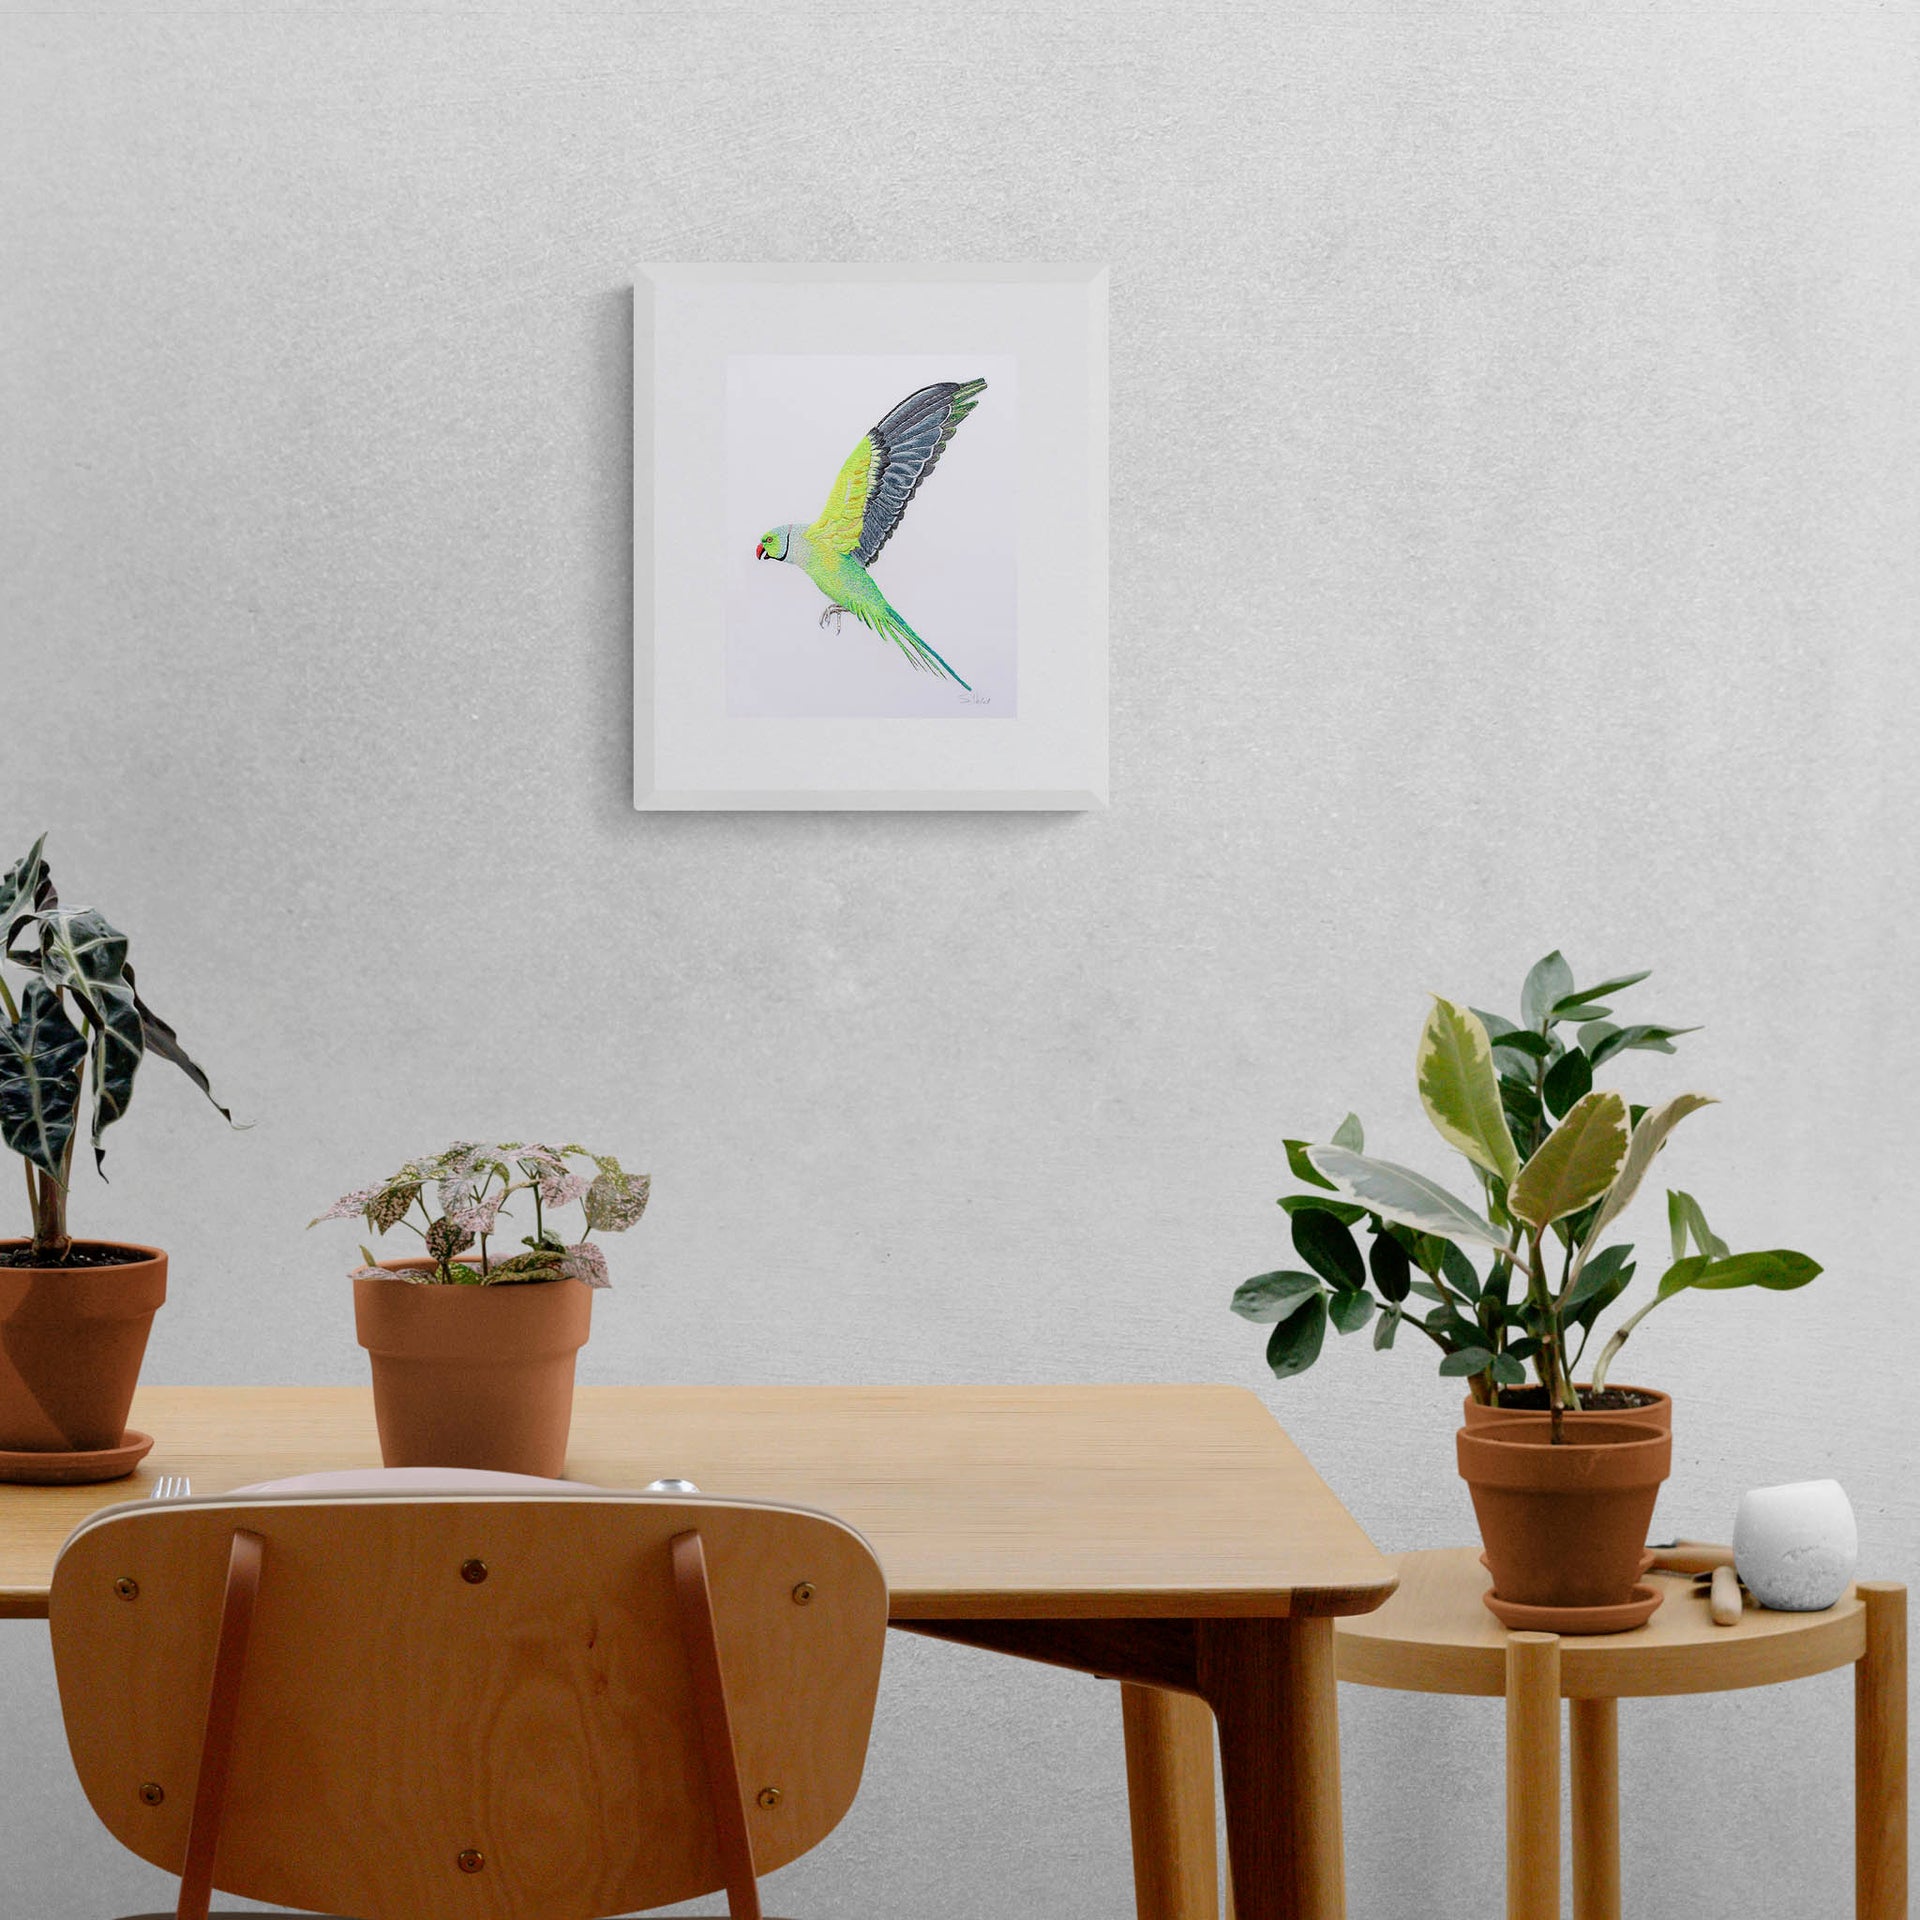 Flying parakeet hand embroidery limited edition print in white frame on the wall